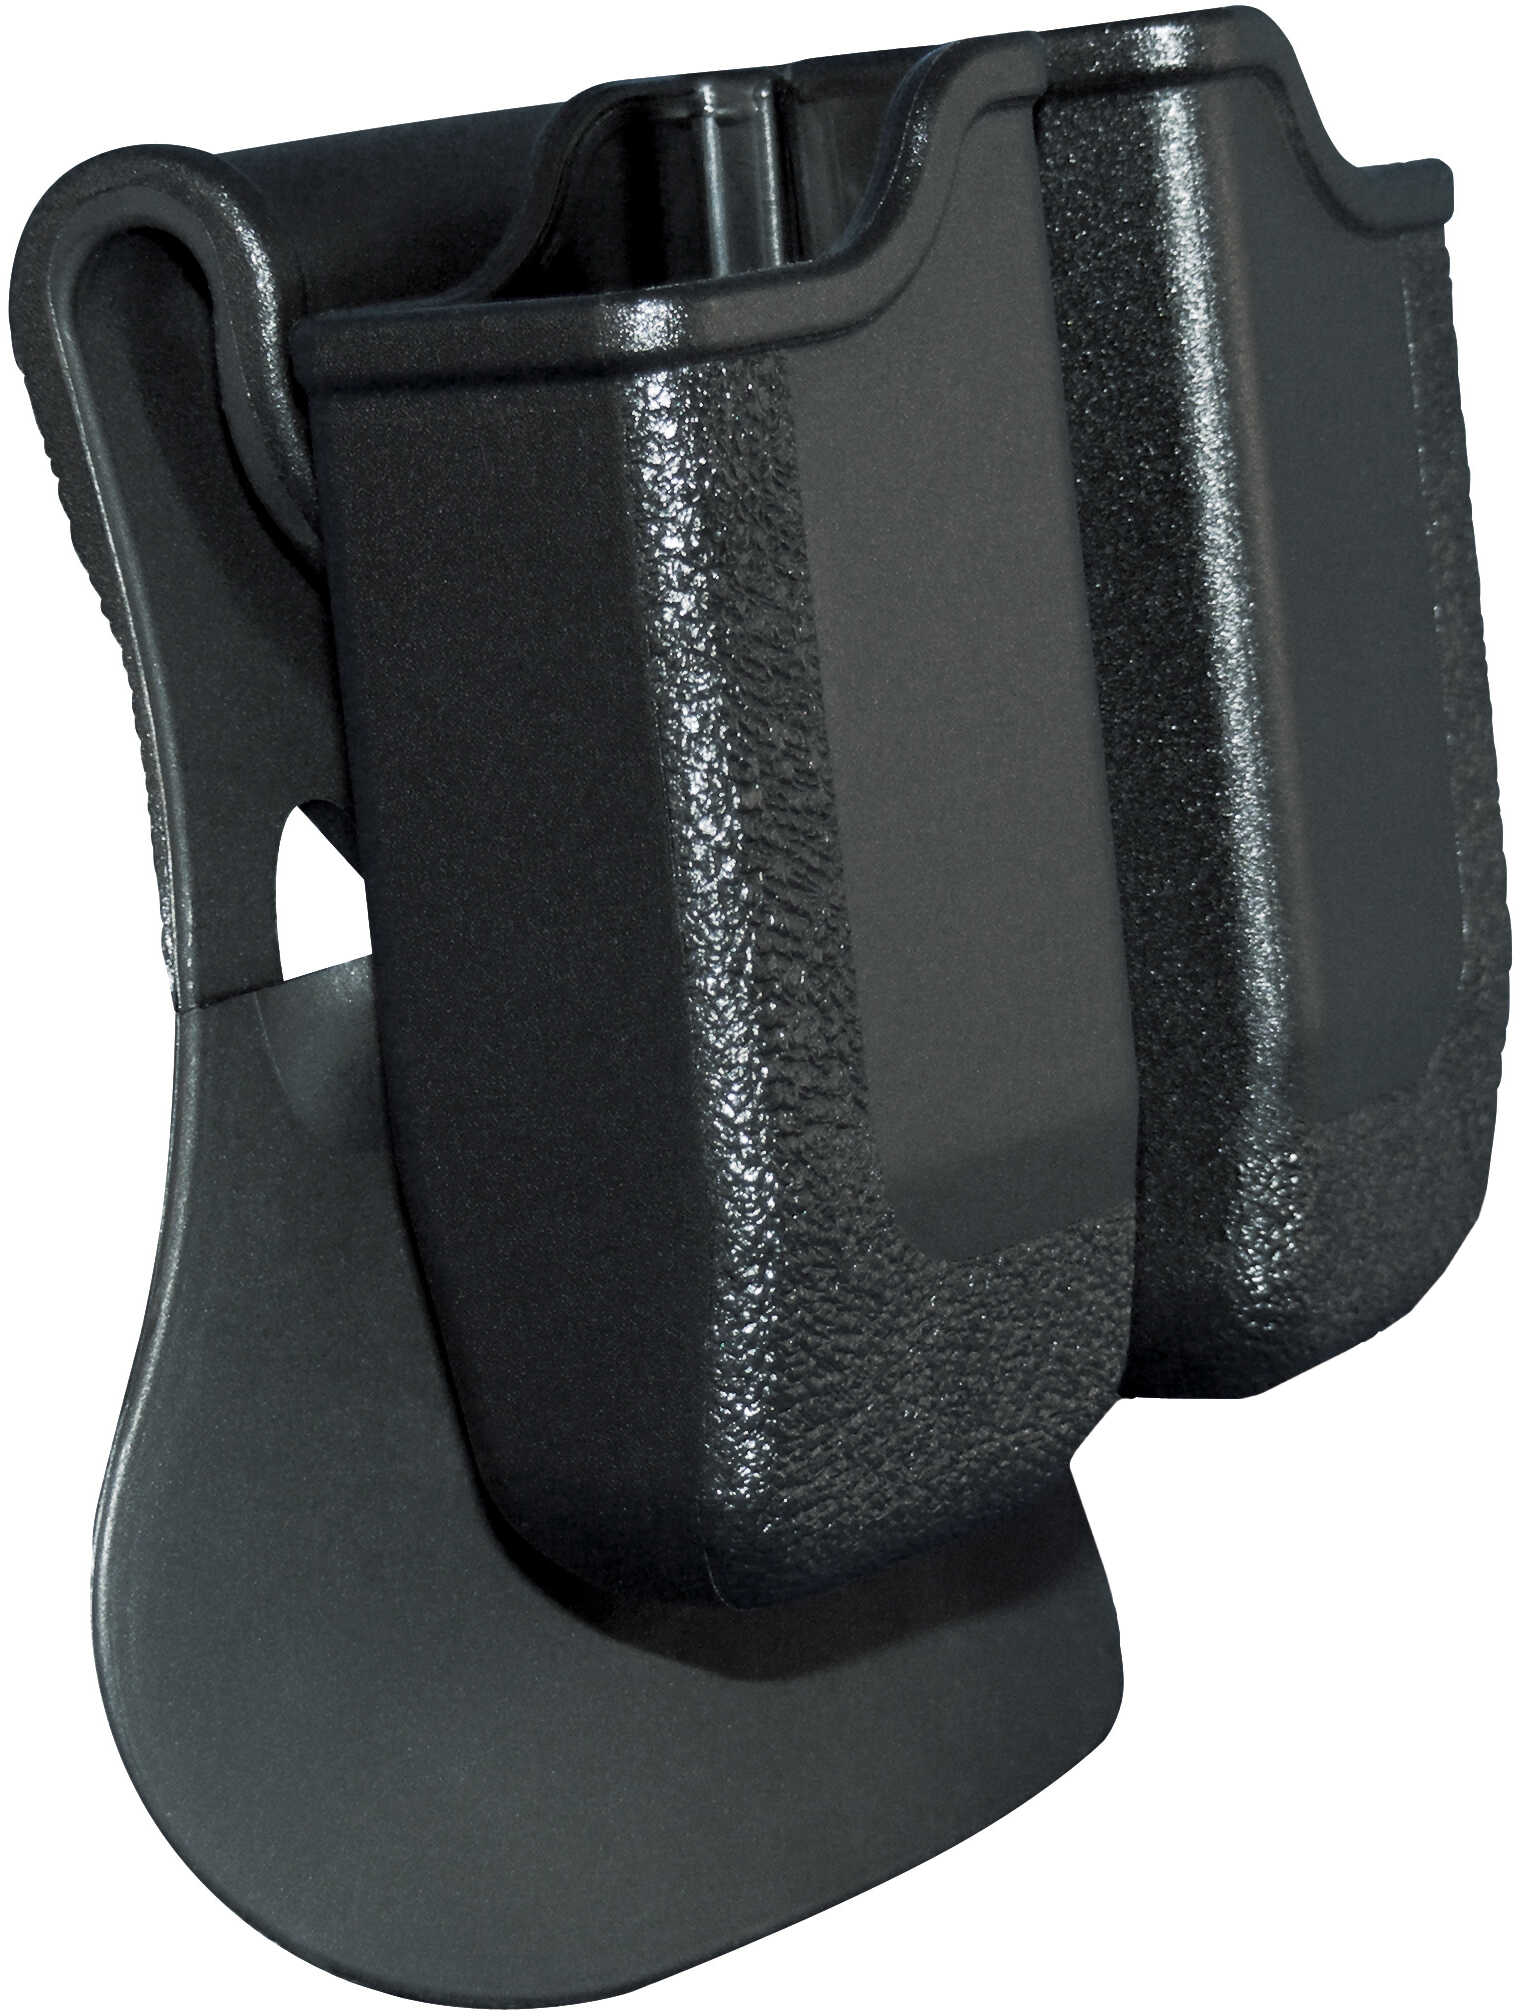 SigArms Sig TAC Dbl Mag Pouch P226 Poly Blk